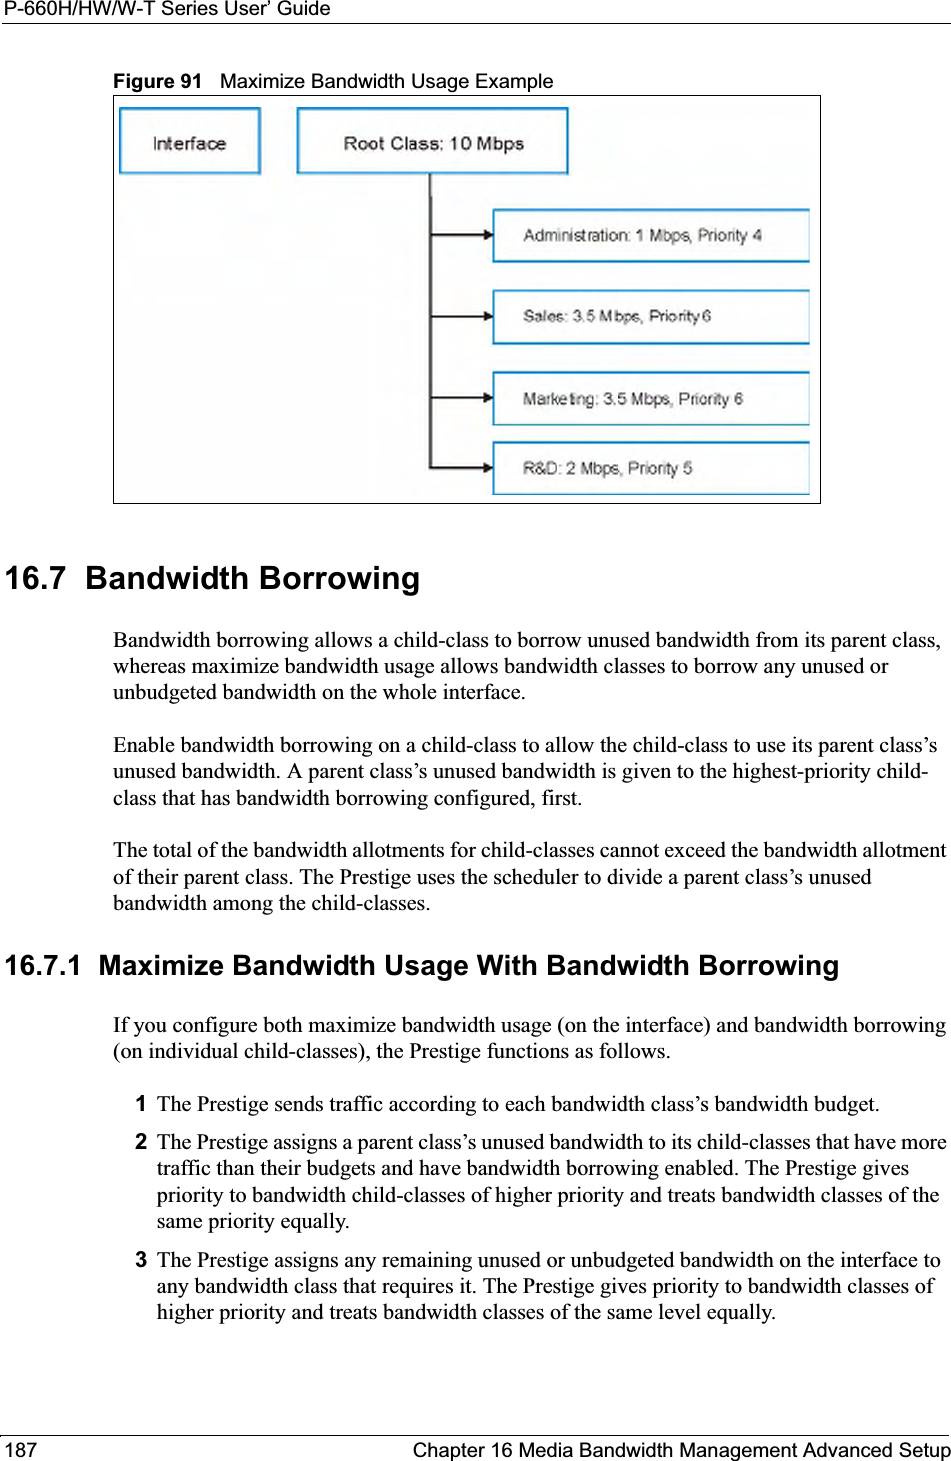 P-660H/HW/W-T Series User’ Guide187 Chapter 16 Media Bandwidth Management Advanced SetupFigure 91   Maximize Bandwidth Usage Example16.7  Bandwidth BorrowingBandwidth borrowing allows a child-class to borrow unused bandwidth from its parent class, whereas maximize bandwidth usage allows bandwidth classes to borrow any unused or unbudgeted bandwidth on the whole interface.Enable bandwidth borrowing on a child-class to allow the child-class to use its parent class’s unused bandwidth. A parent class’s unused bandwidth is given to the highest-priority child-class that has bandwidth borrowing configured, first.The total of the bandwidth allotments for child-classes cannot exceed the bandwidth allotment of their parent class. The Prestige uses the scheduler to divide a parent class’s unused bandwidth among the child-classes. 16.7.1  Maximize Bandwidth Usage With Bandwidth BorrowingIf you configure both maximize bandwidth usage (on the interface) and bandwidth borrowing (on individual child-classes), the Prestige functions as follows.1The Prestige sends traffic according to each bandwidth class’s bandwidth budget.2The Prestige assigns a parent class’s unused bandwidth to its child-classes that have more traffic than their budgets and have bandwidth borrowing enabled. The Prestige gives priority to bandwidth child-classes of higher priority and treats bandwidth classes of the same priority equally.3The Prestige assigns any remaining unused or unbudgeted bandwidth on the interface to any bandwidth class that requires it. The Prestige gives priority to bandwidth classes of higher priority and treats bandwidth classes of the same level equally.